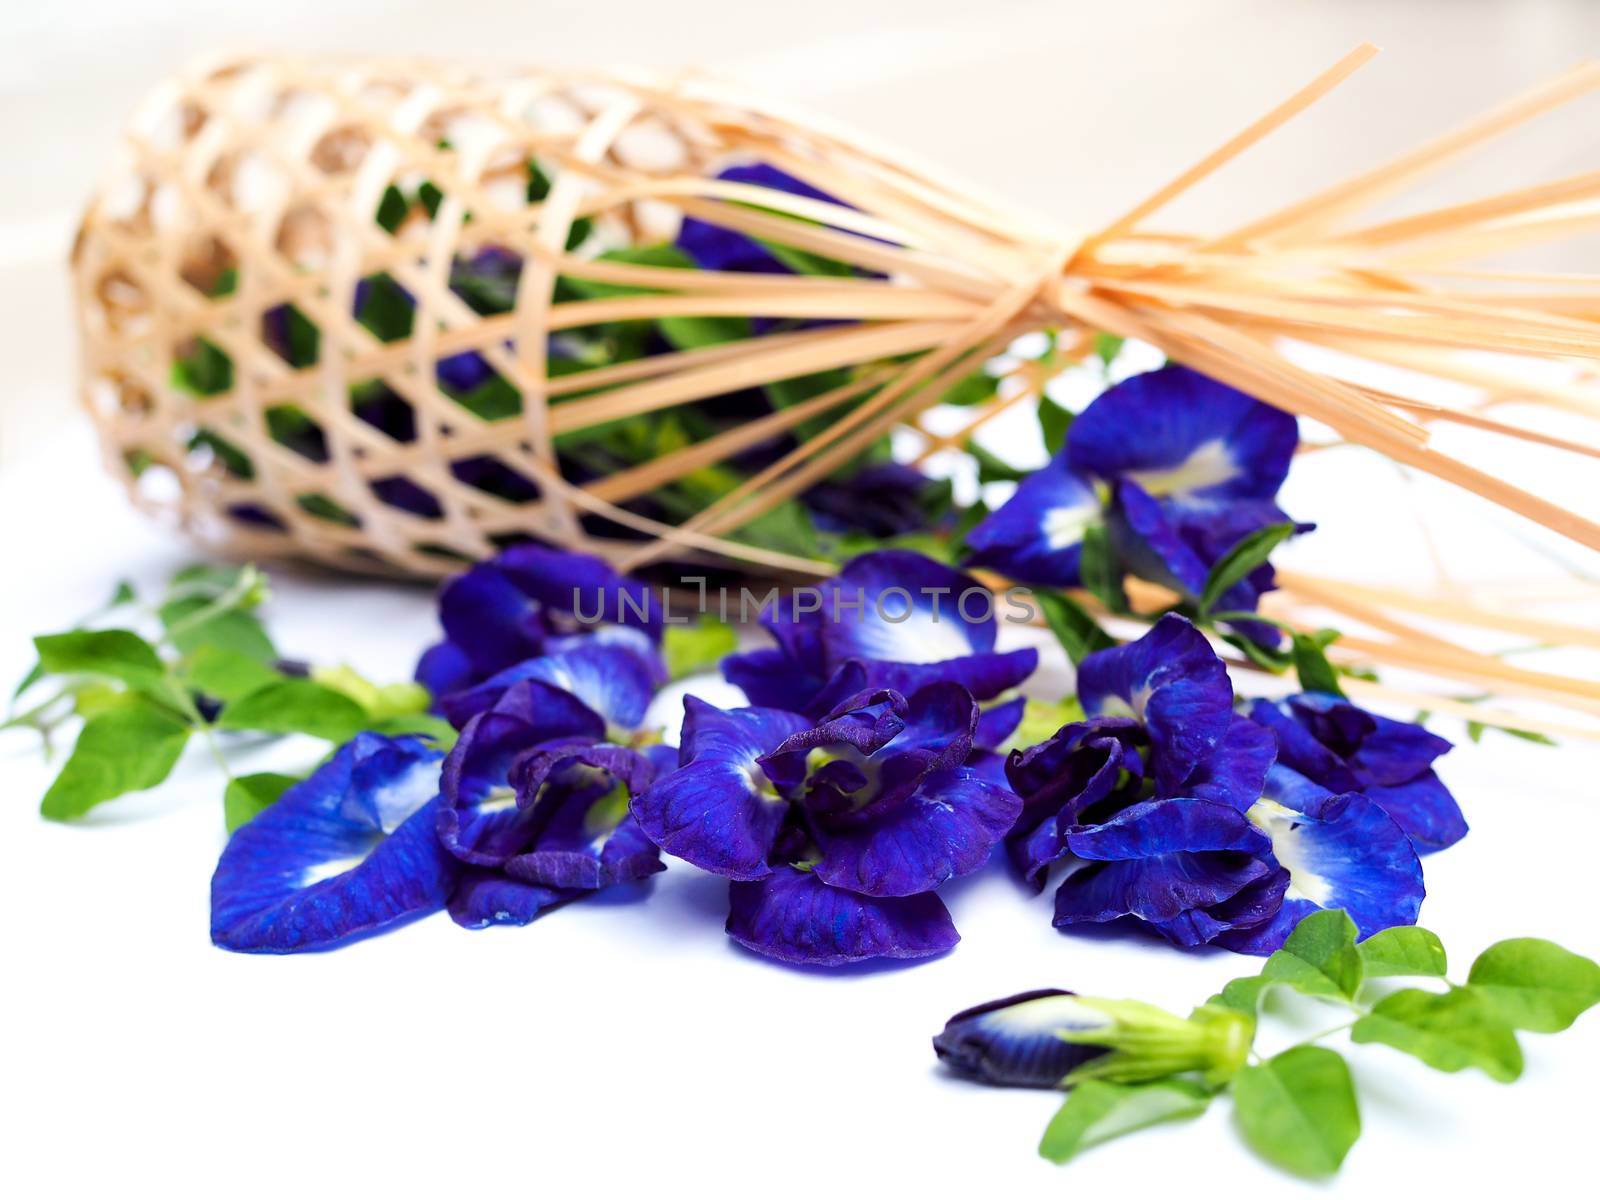 plant in nature is herb with butterfly pea isolated on white by kittima05